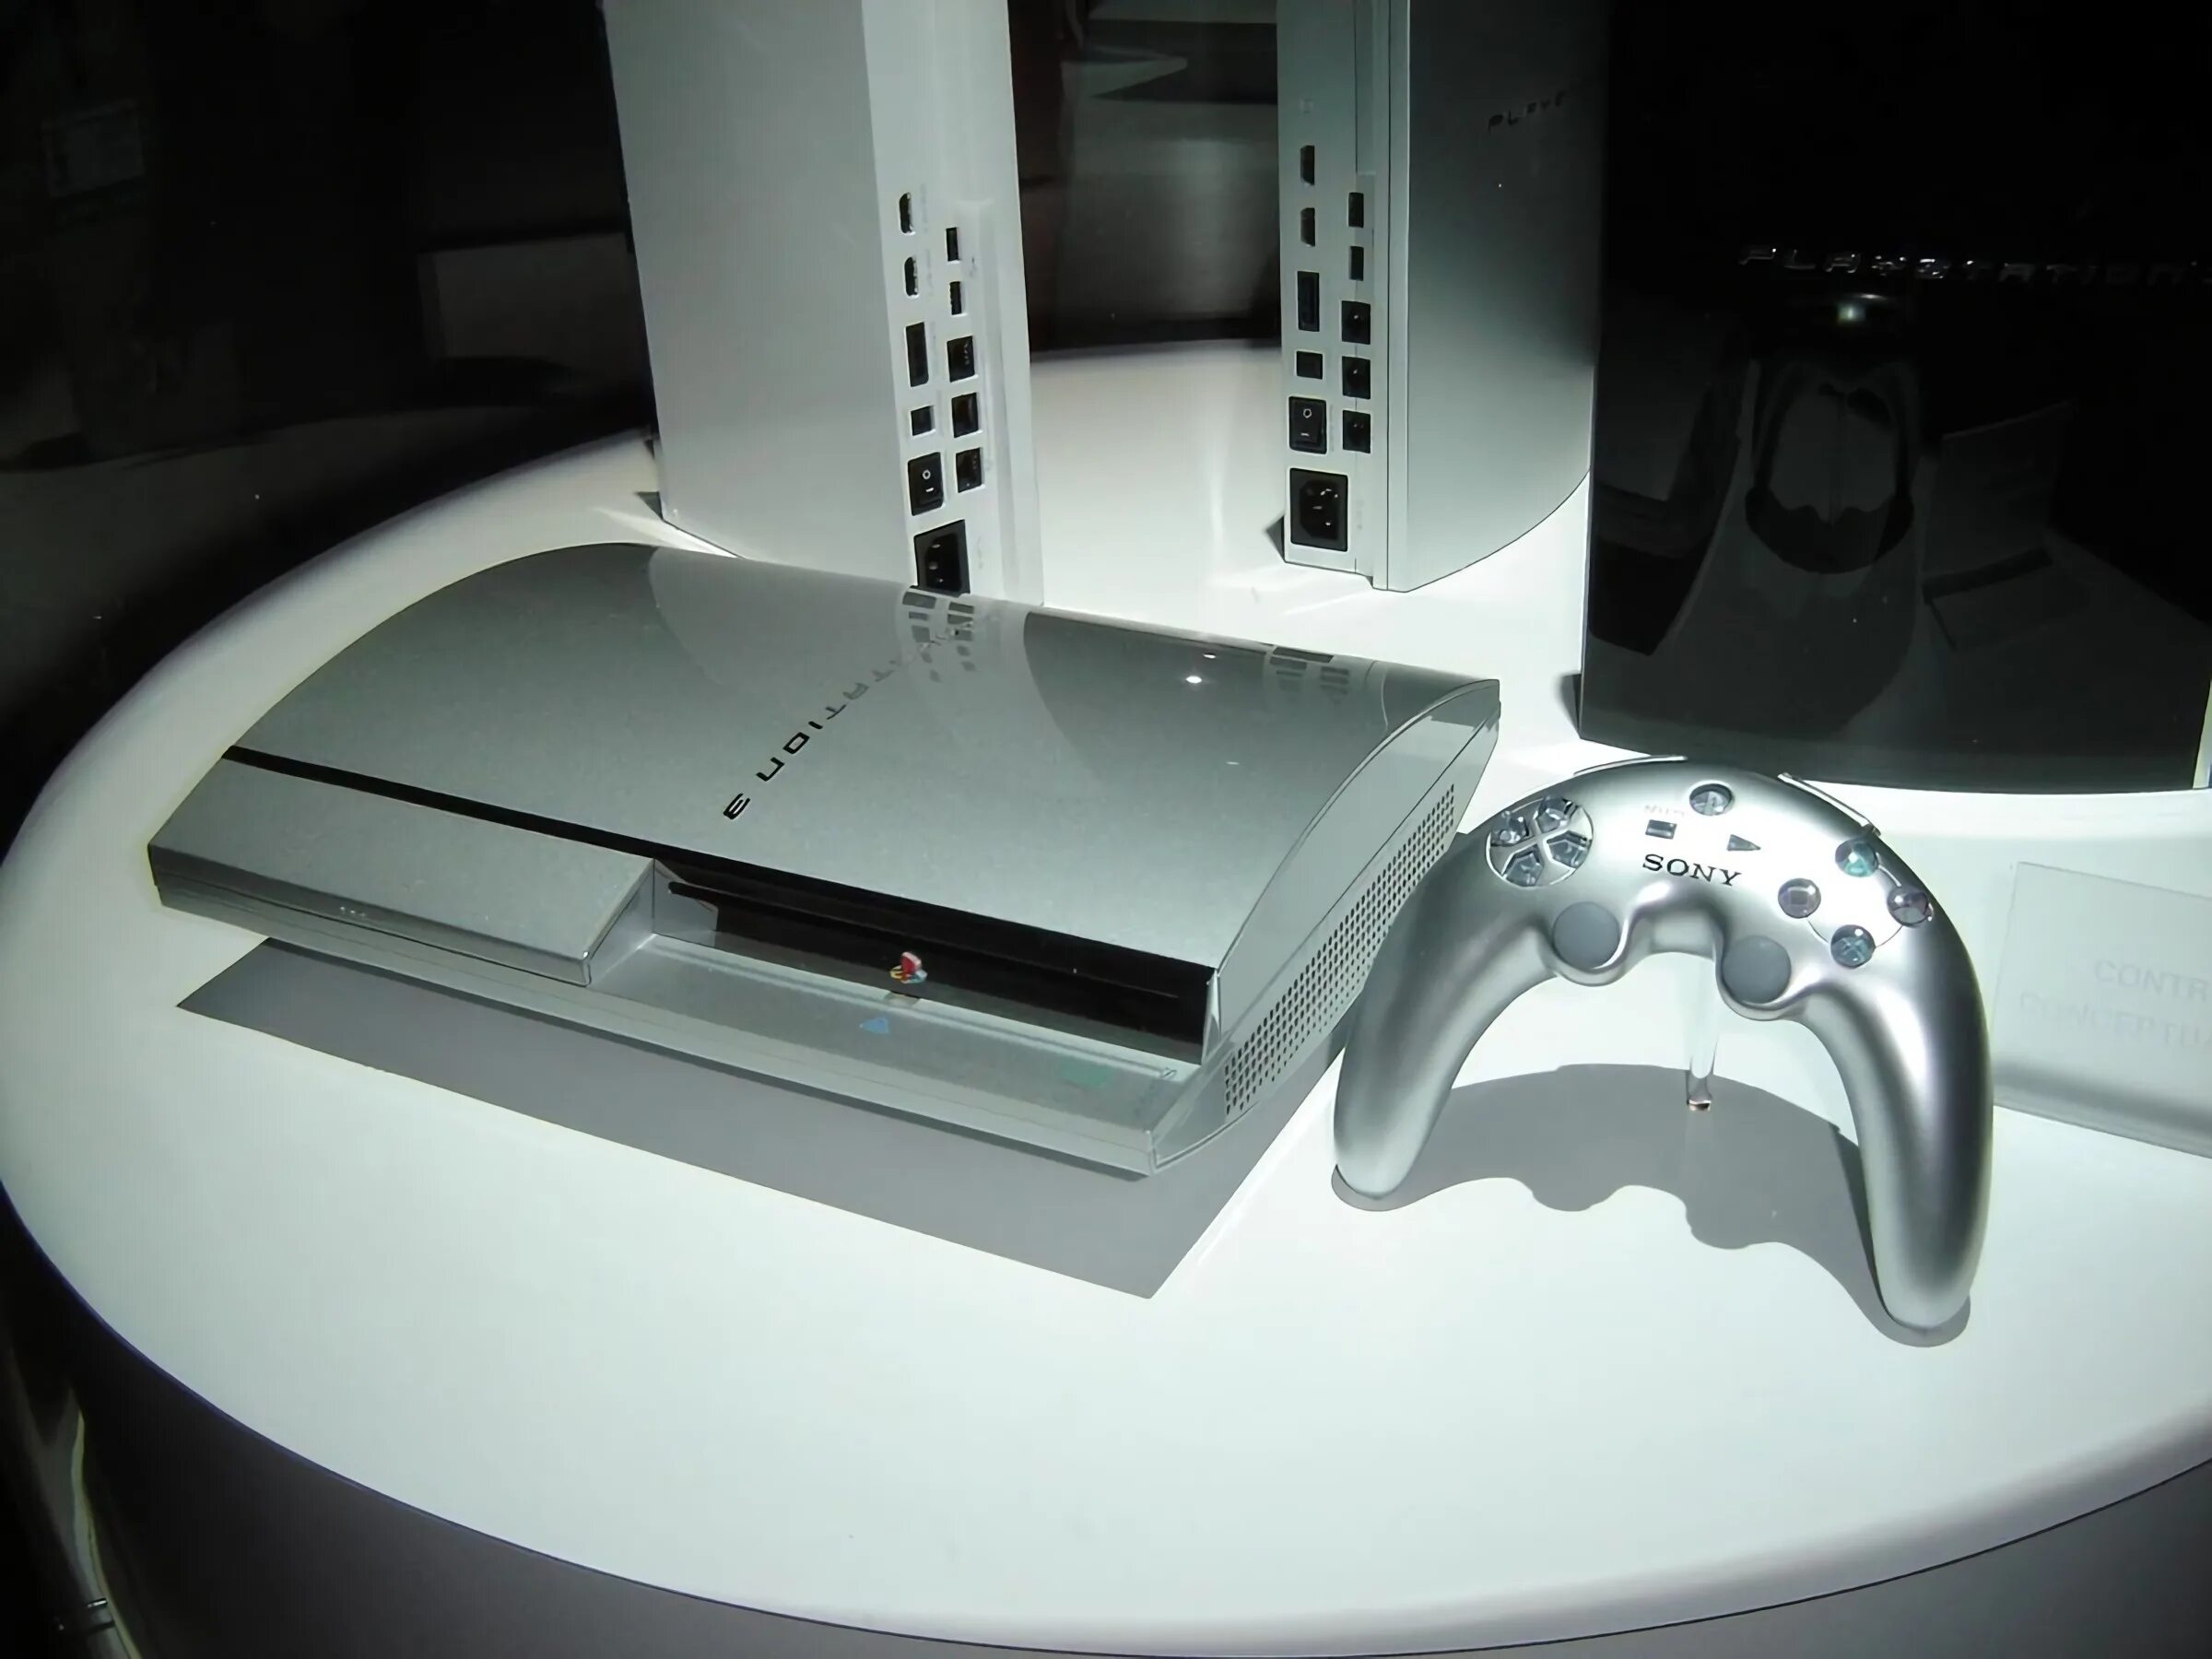 Sony ps3 Silver. PLAYSTATION 3 Console Prototype. Sony ps1 DEVKIT. Ps3 контроллер Бумеранг. Sony playstation ремонтundefined